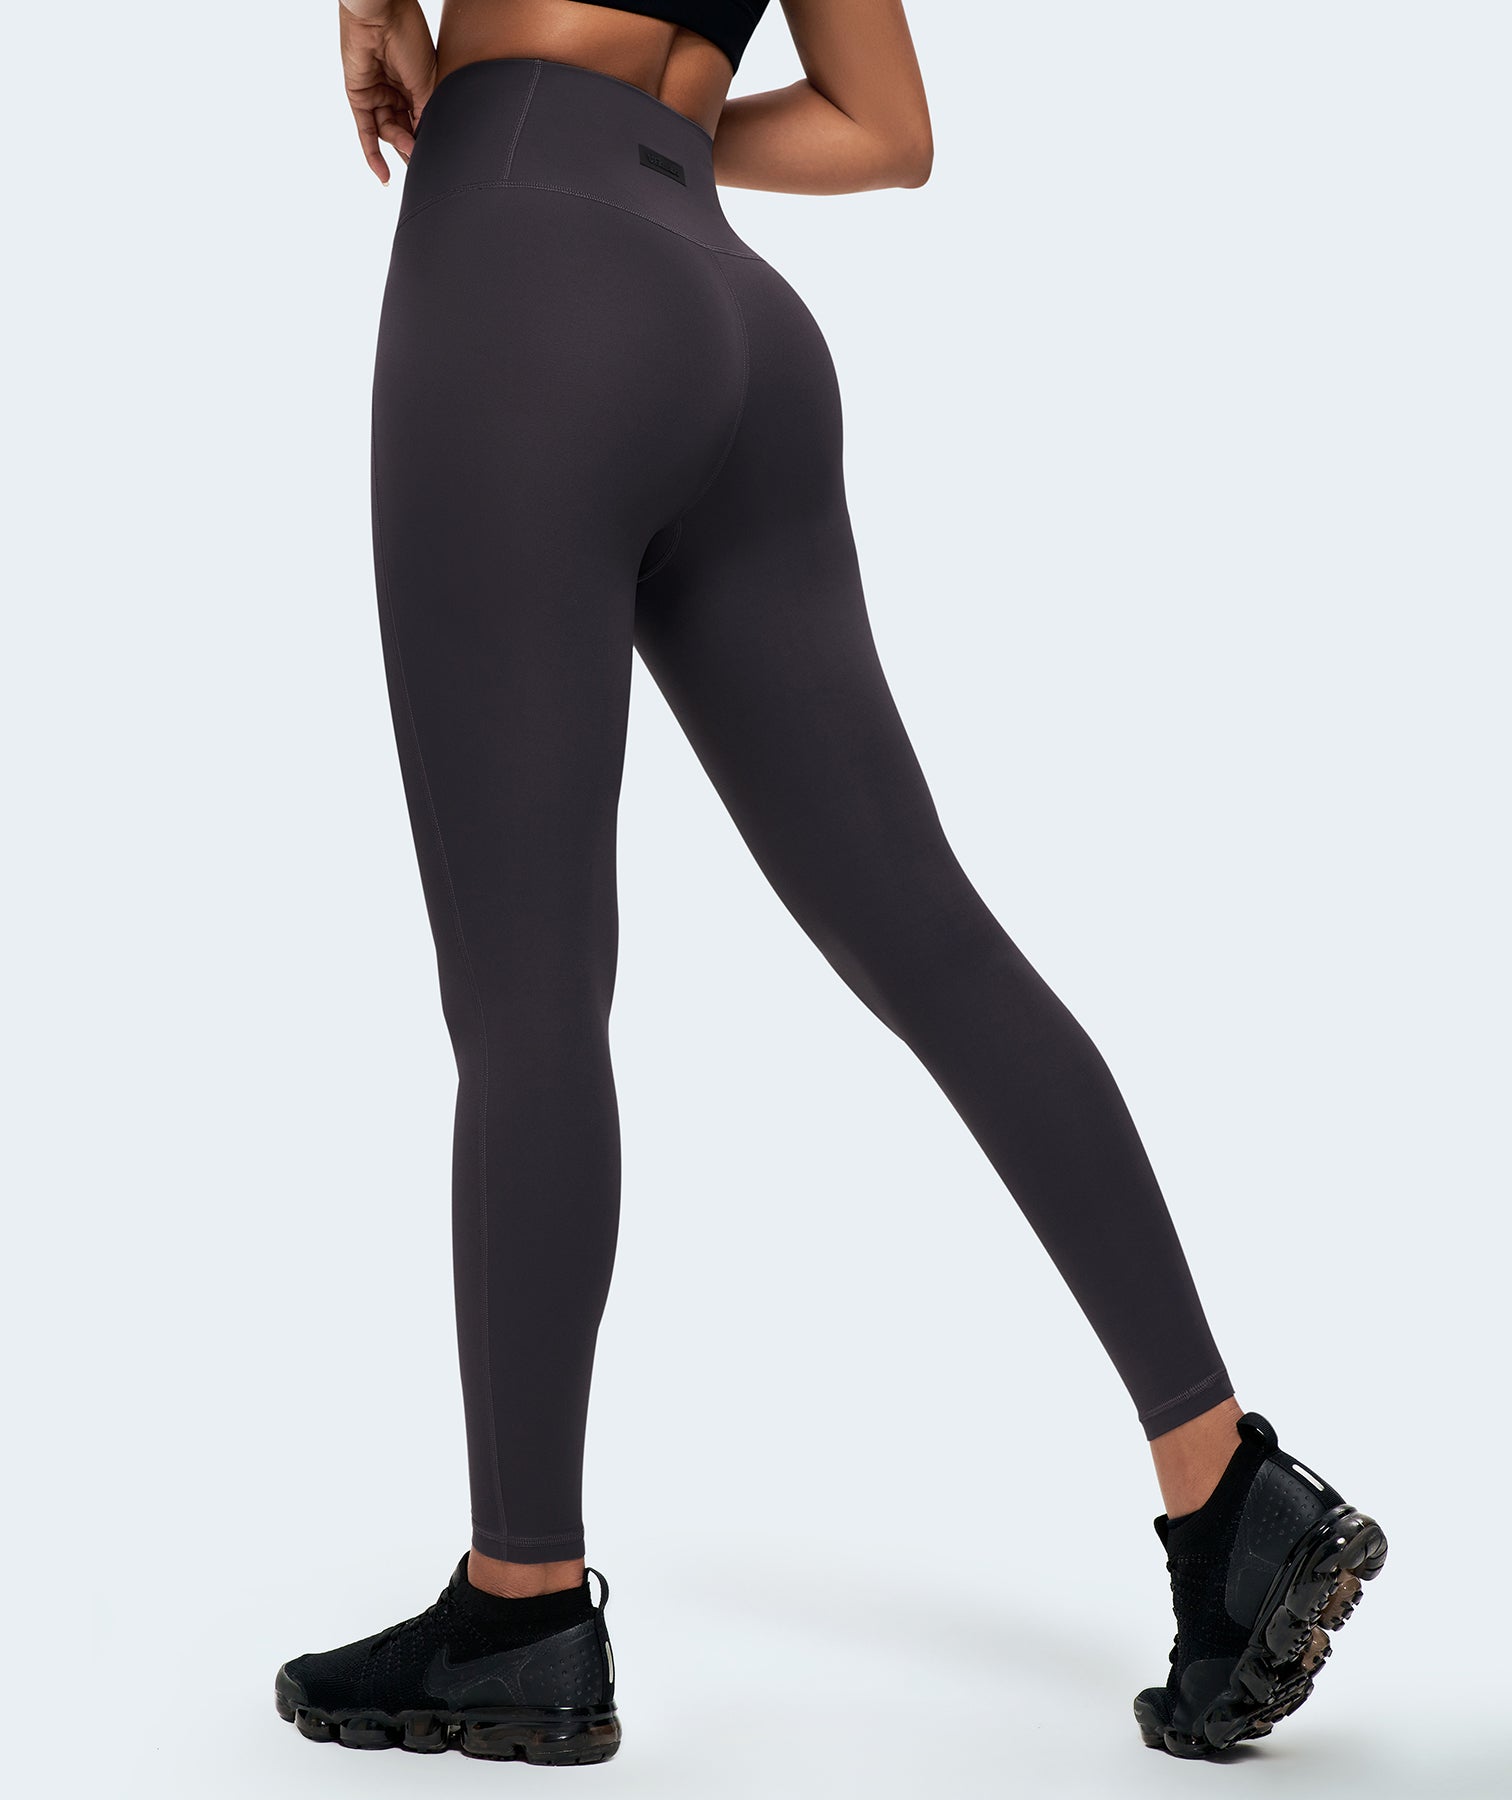 High Waisted Workout Leggings Gray